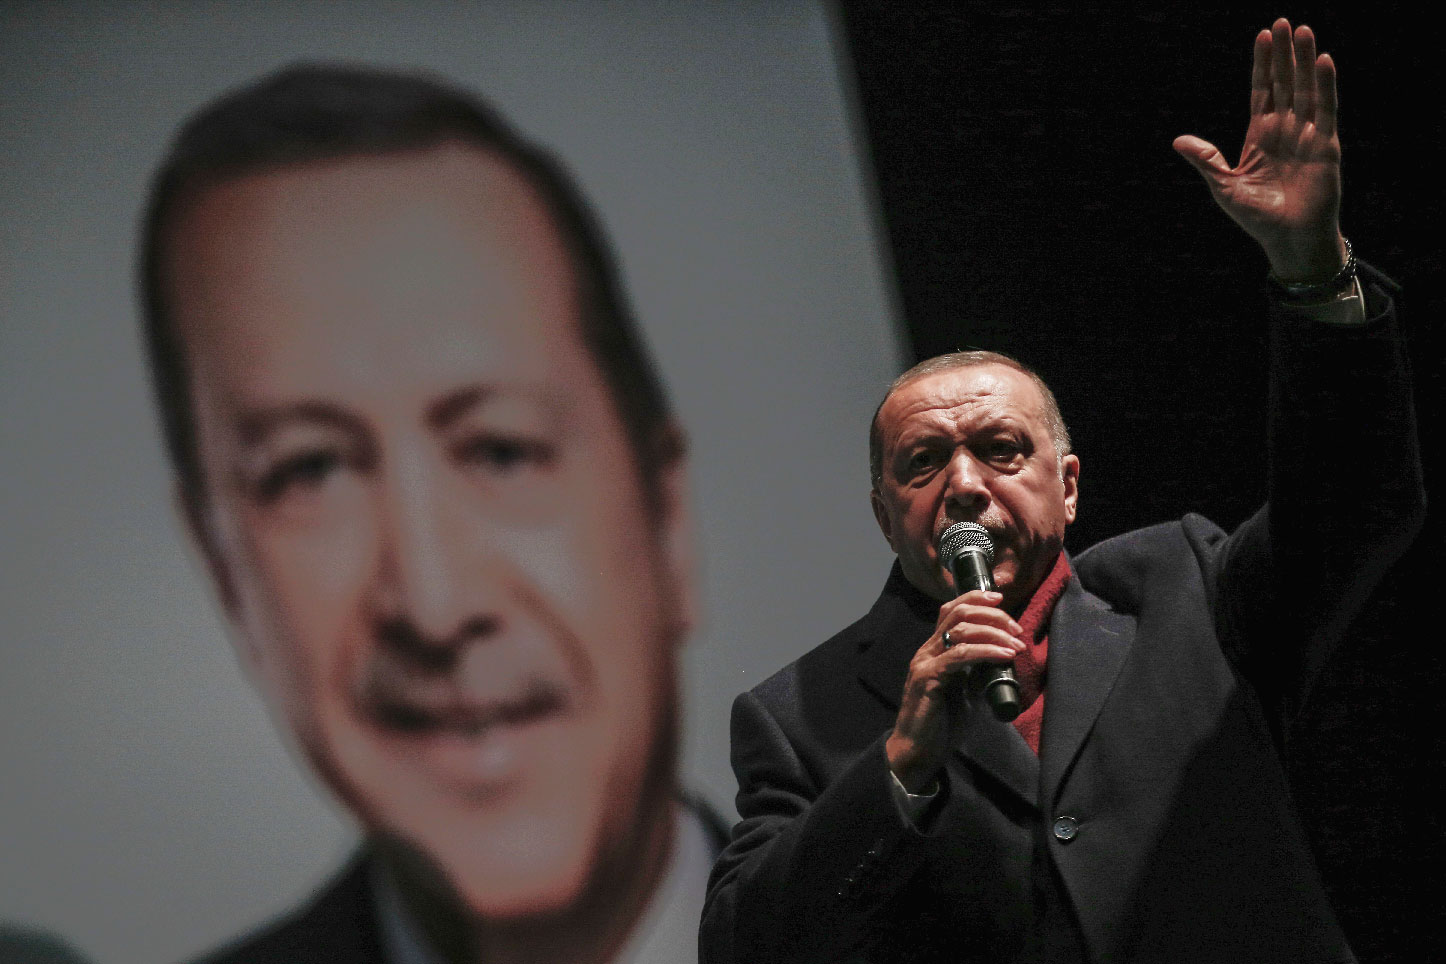 Turkey's President Recep Tayyip Erdogan addresses the supporters of his ruling Justice and Development Party, AKP, at a rally in Istanbul, late Tuesday, March 19, 2019, ahead of local elections scheduled for March 31, 2019.